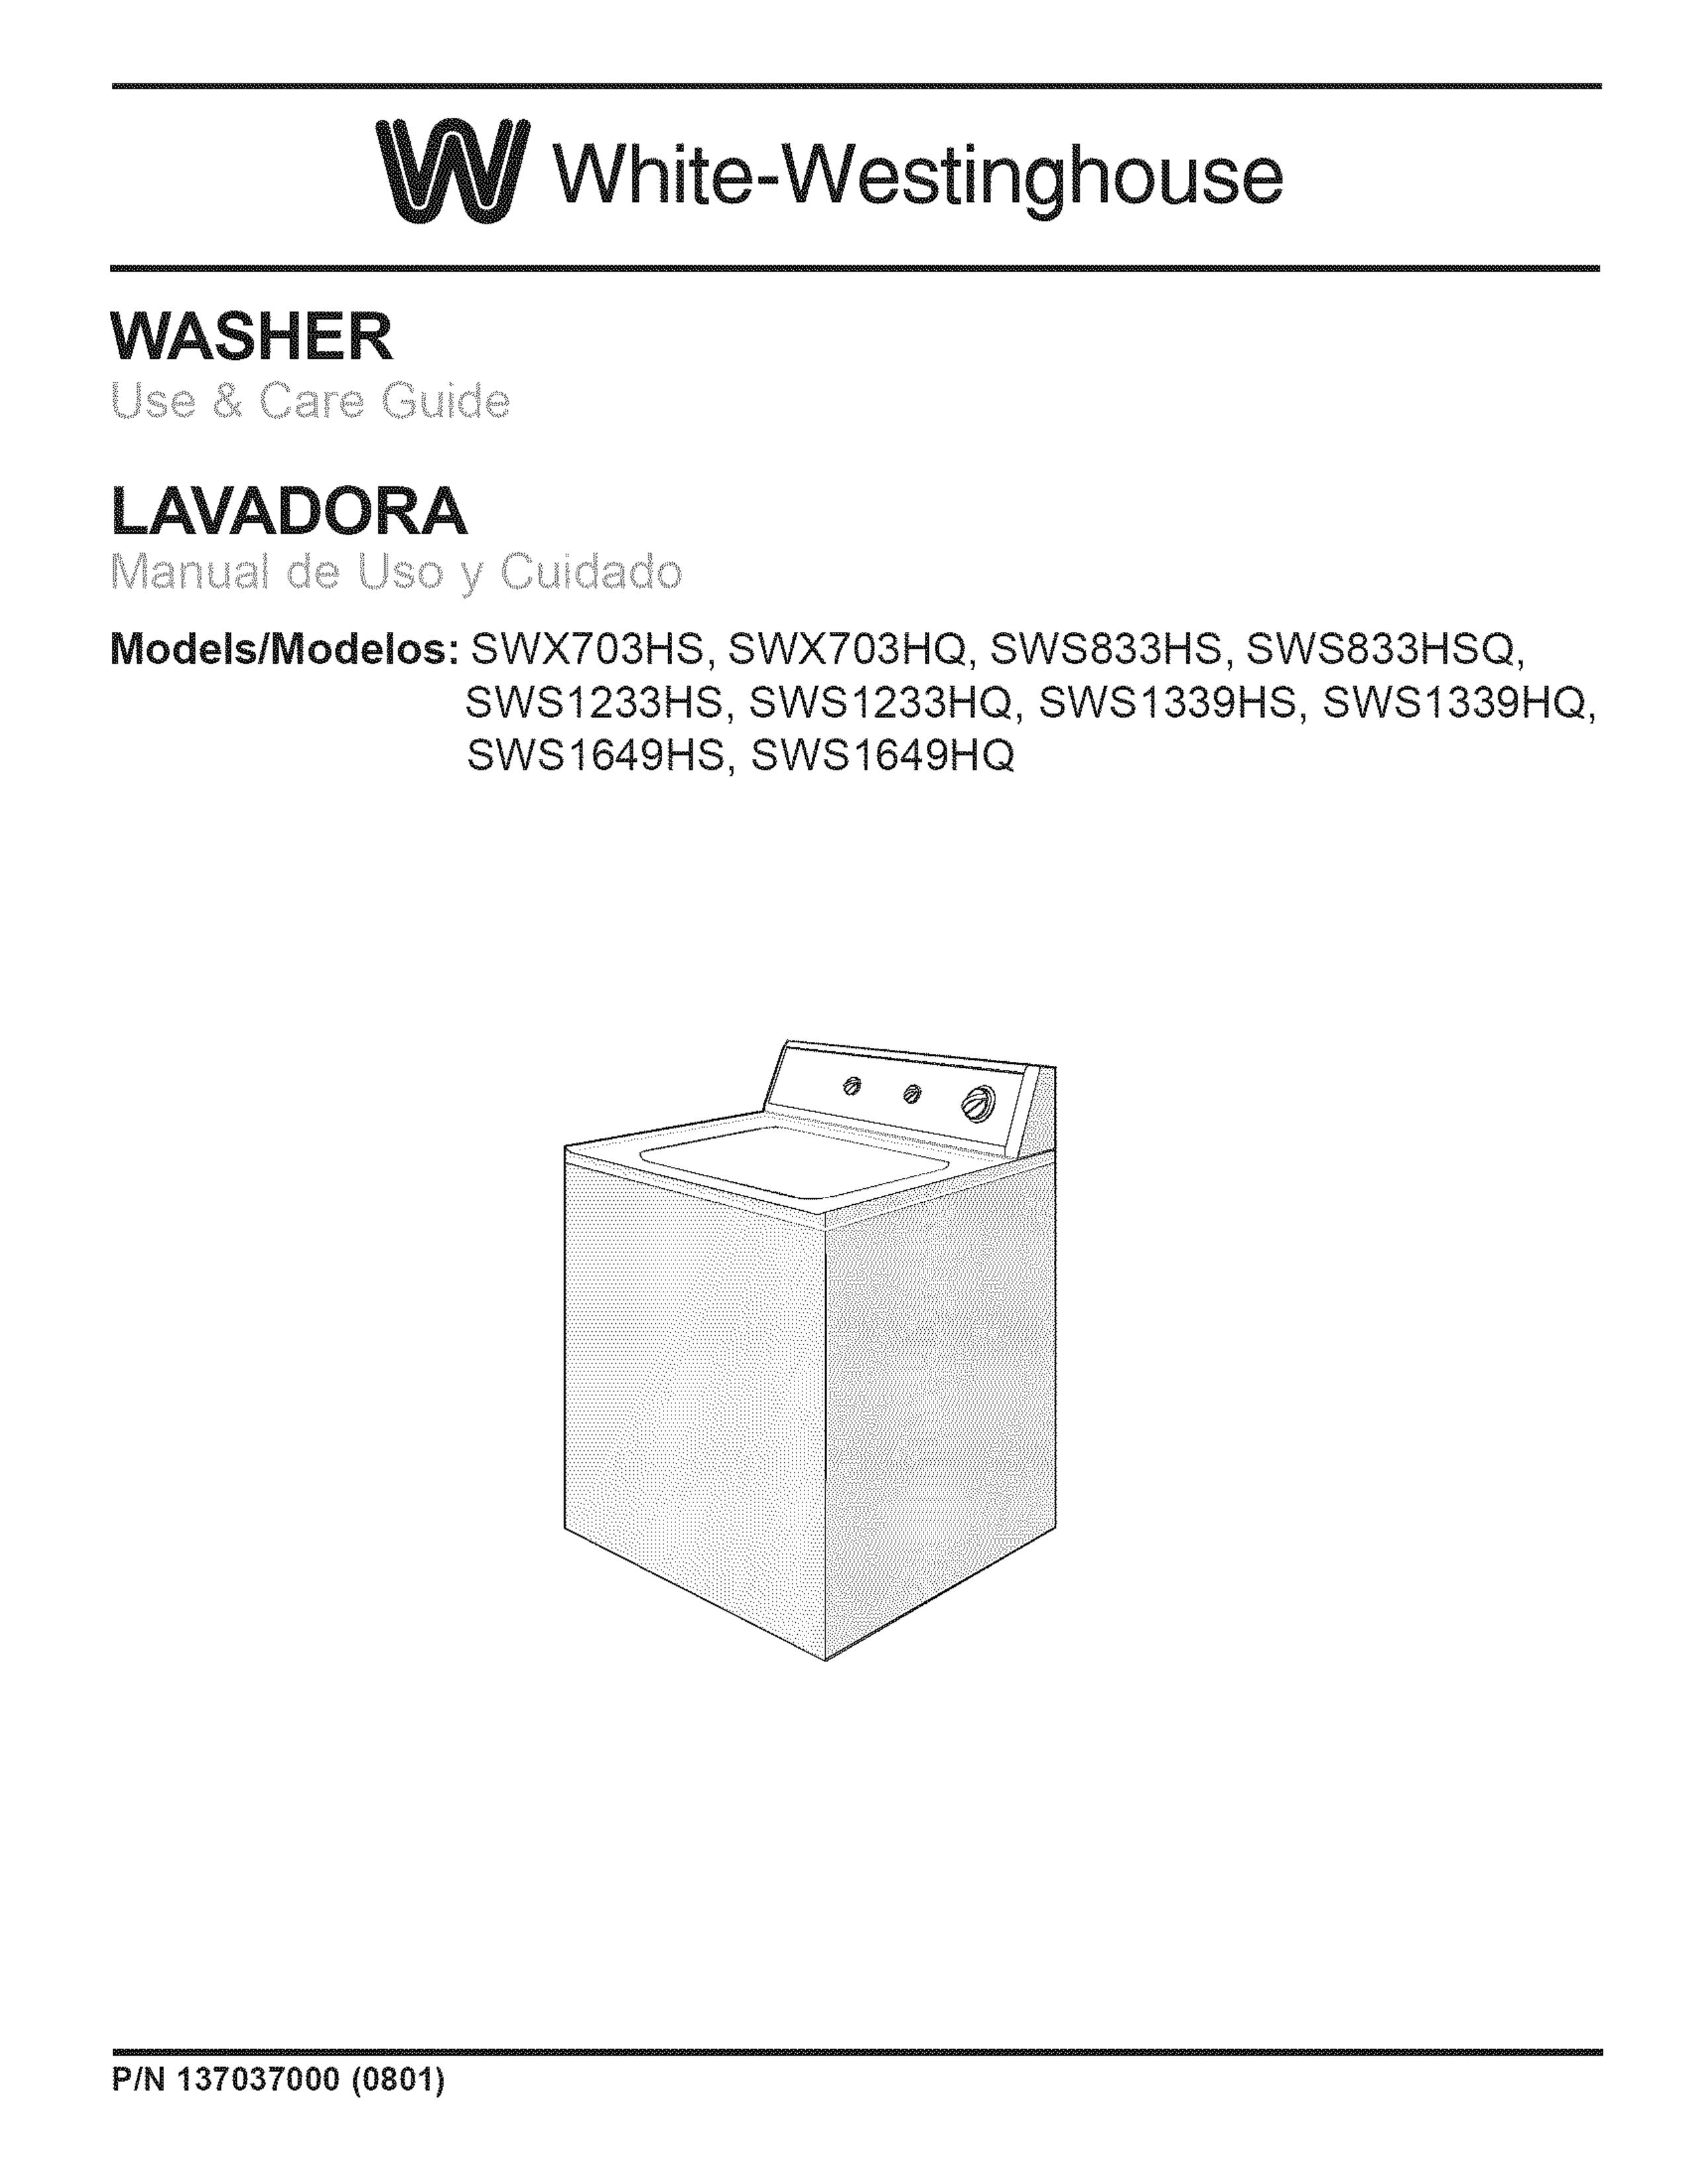 White-Westinghouse SWS1233HS Washer User Manual